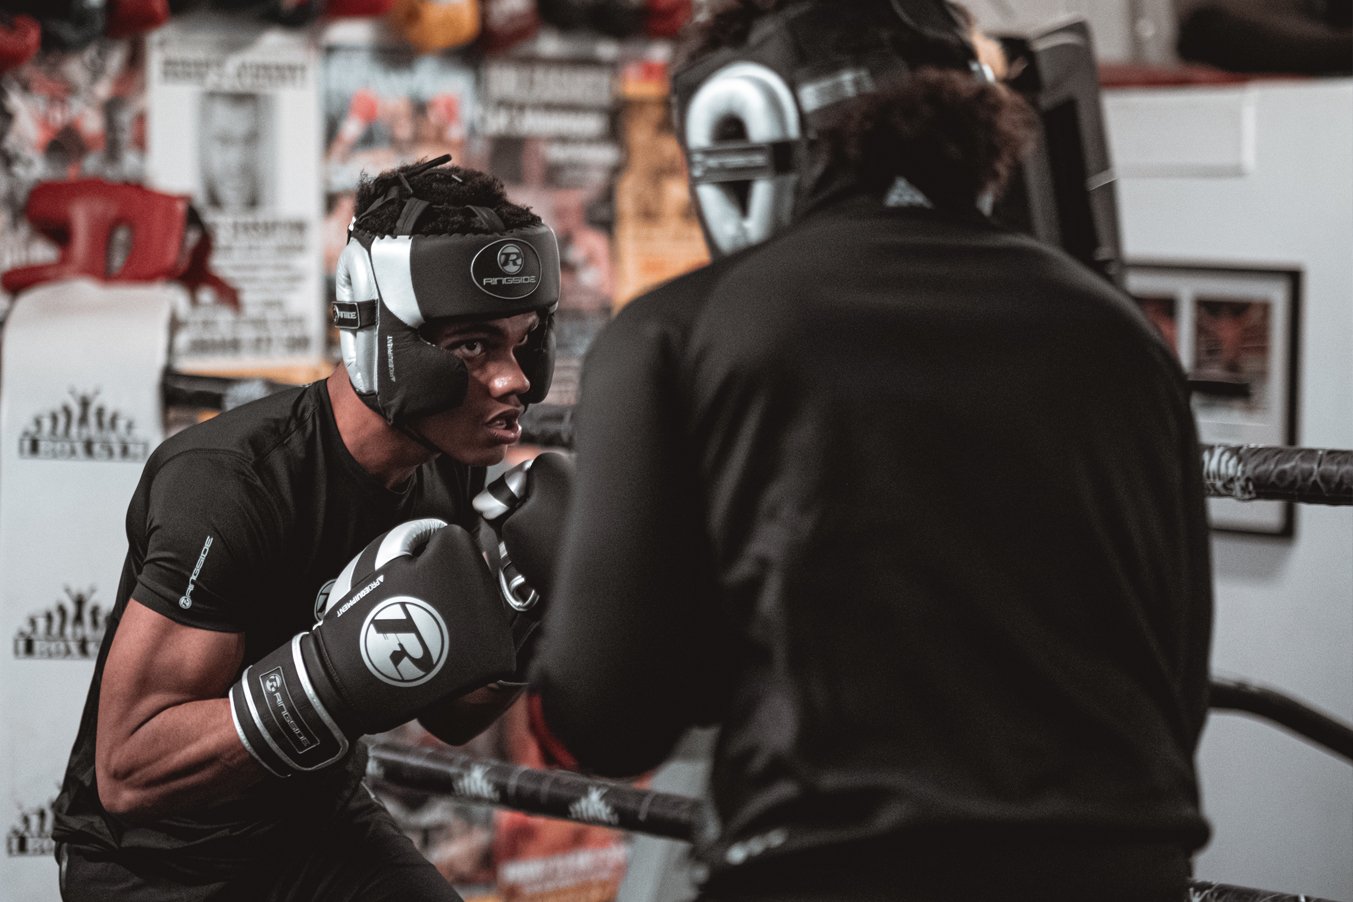 boxer wearing black and silver headguard and gloves whilst sparring